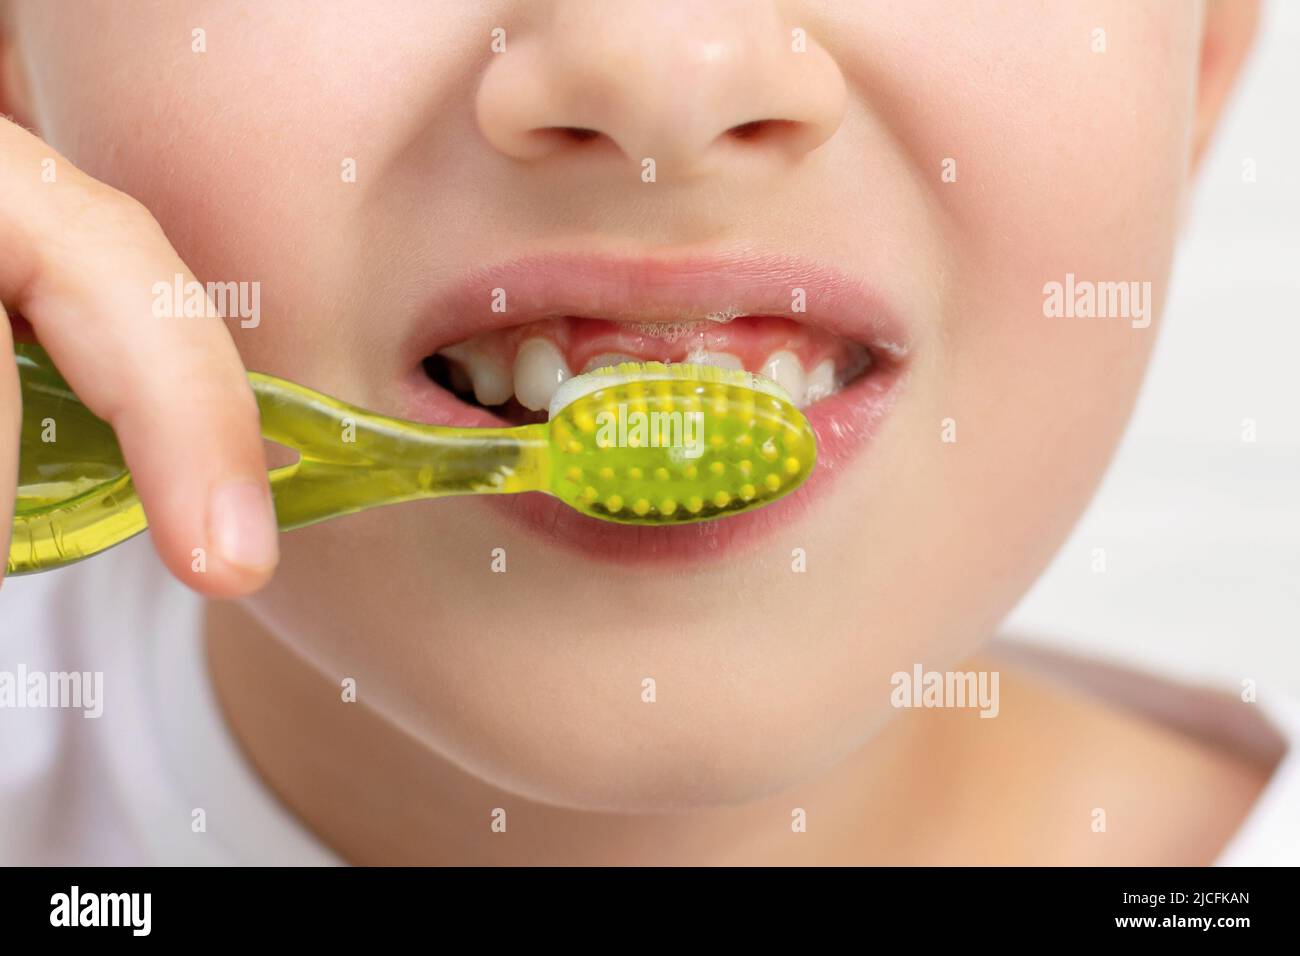 Close-up of an unrecognizable smiling child, he holds toothbrush in his hands and brushes teeth using toothpaste. Morning routine, dental hygiene. Stock Photo